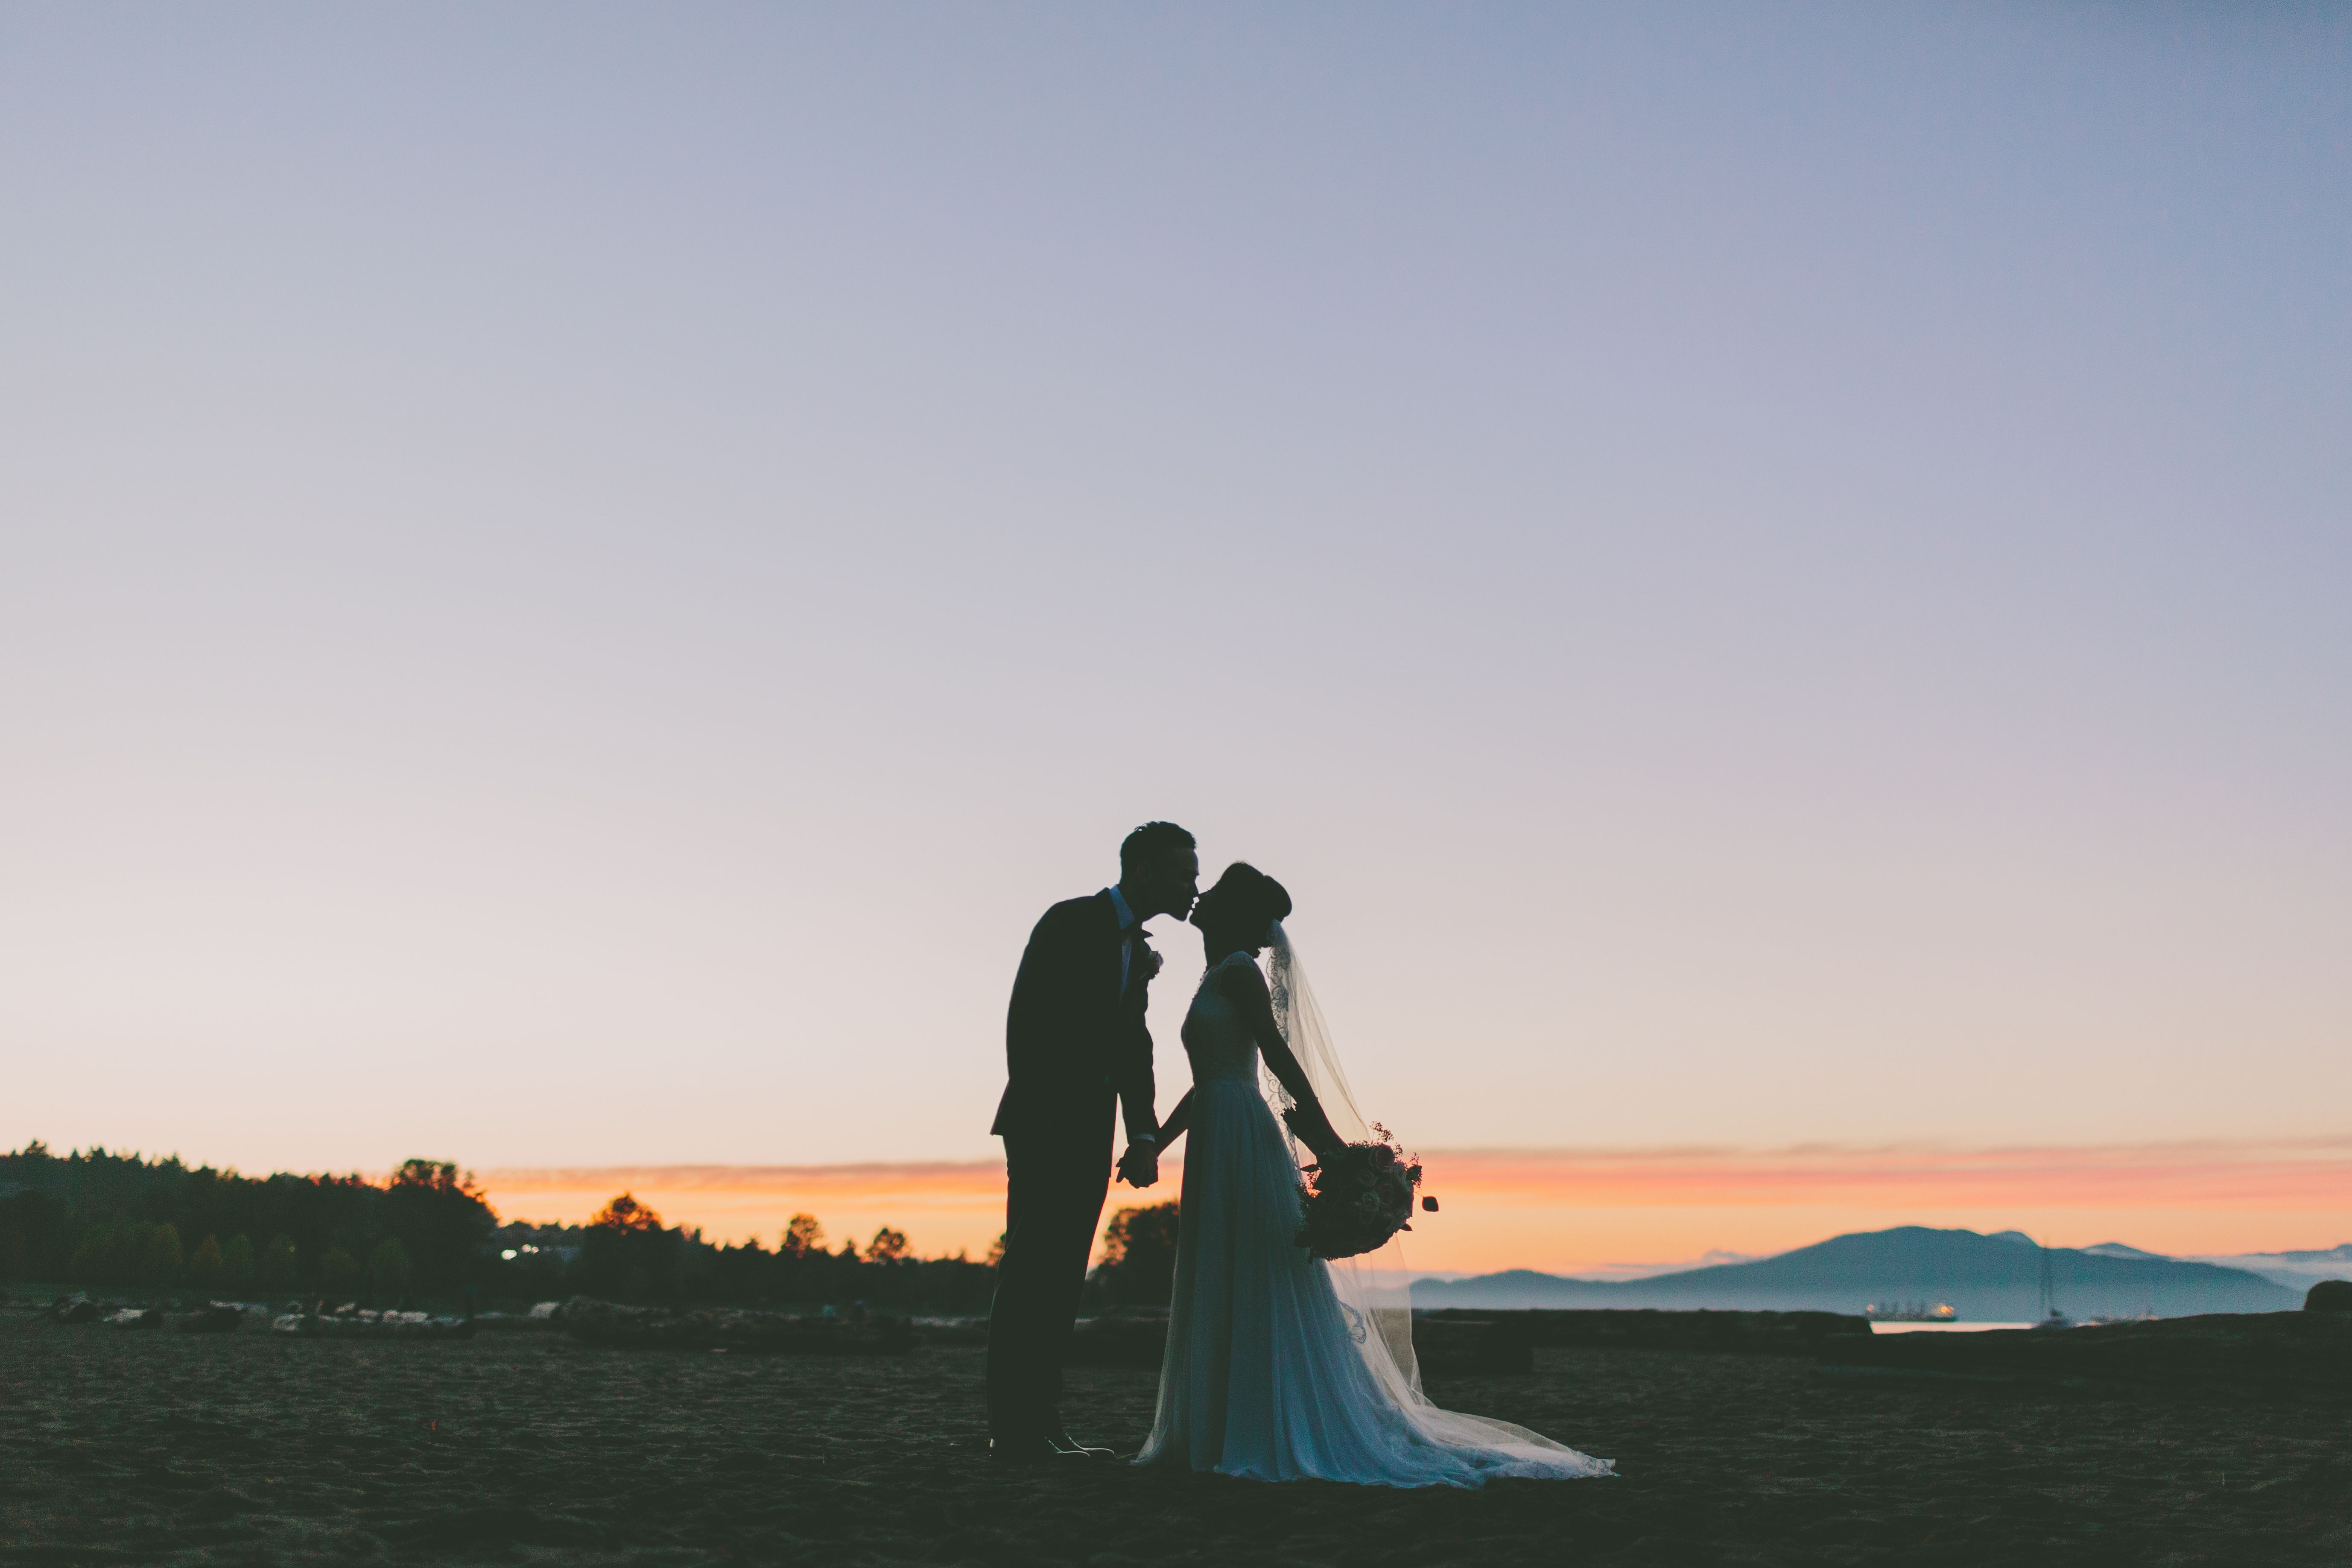 a-silhouette-of-a-bride-and-groom-kissing-on-the-b-Z8SMMW2.jpg